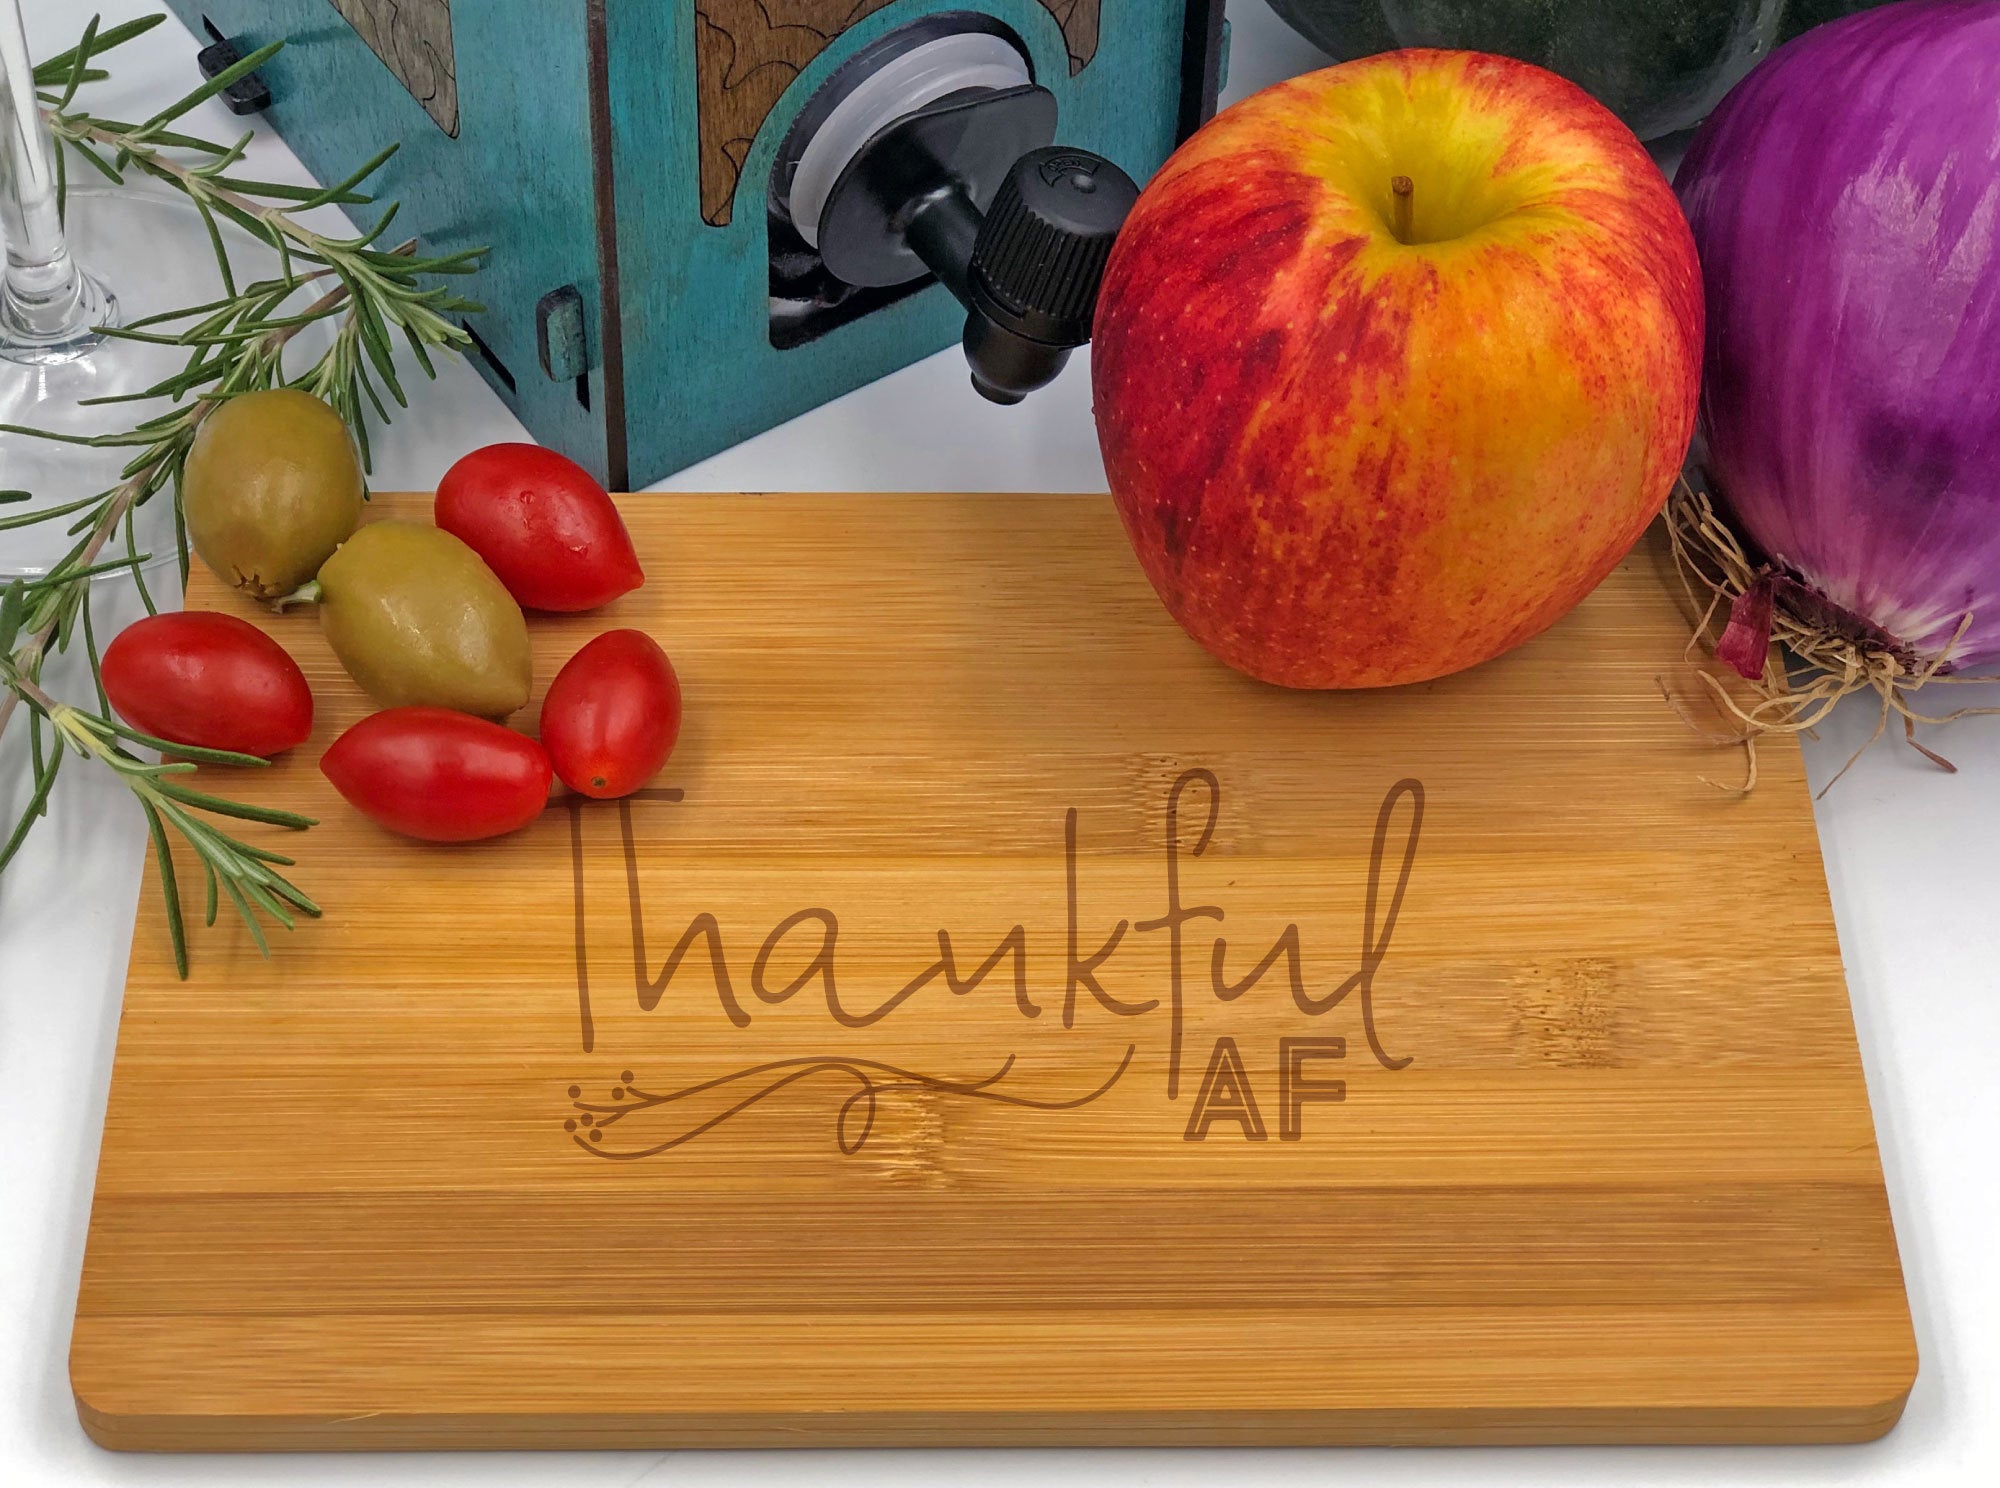 Thankful AF Cheese Snack Tray / Cutting Board Engraved Bamboo